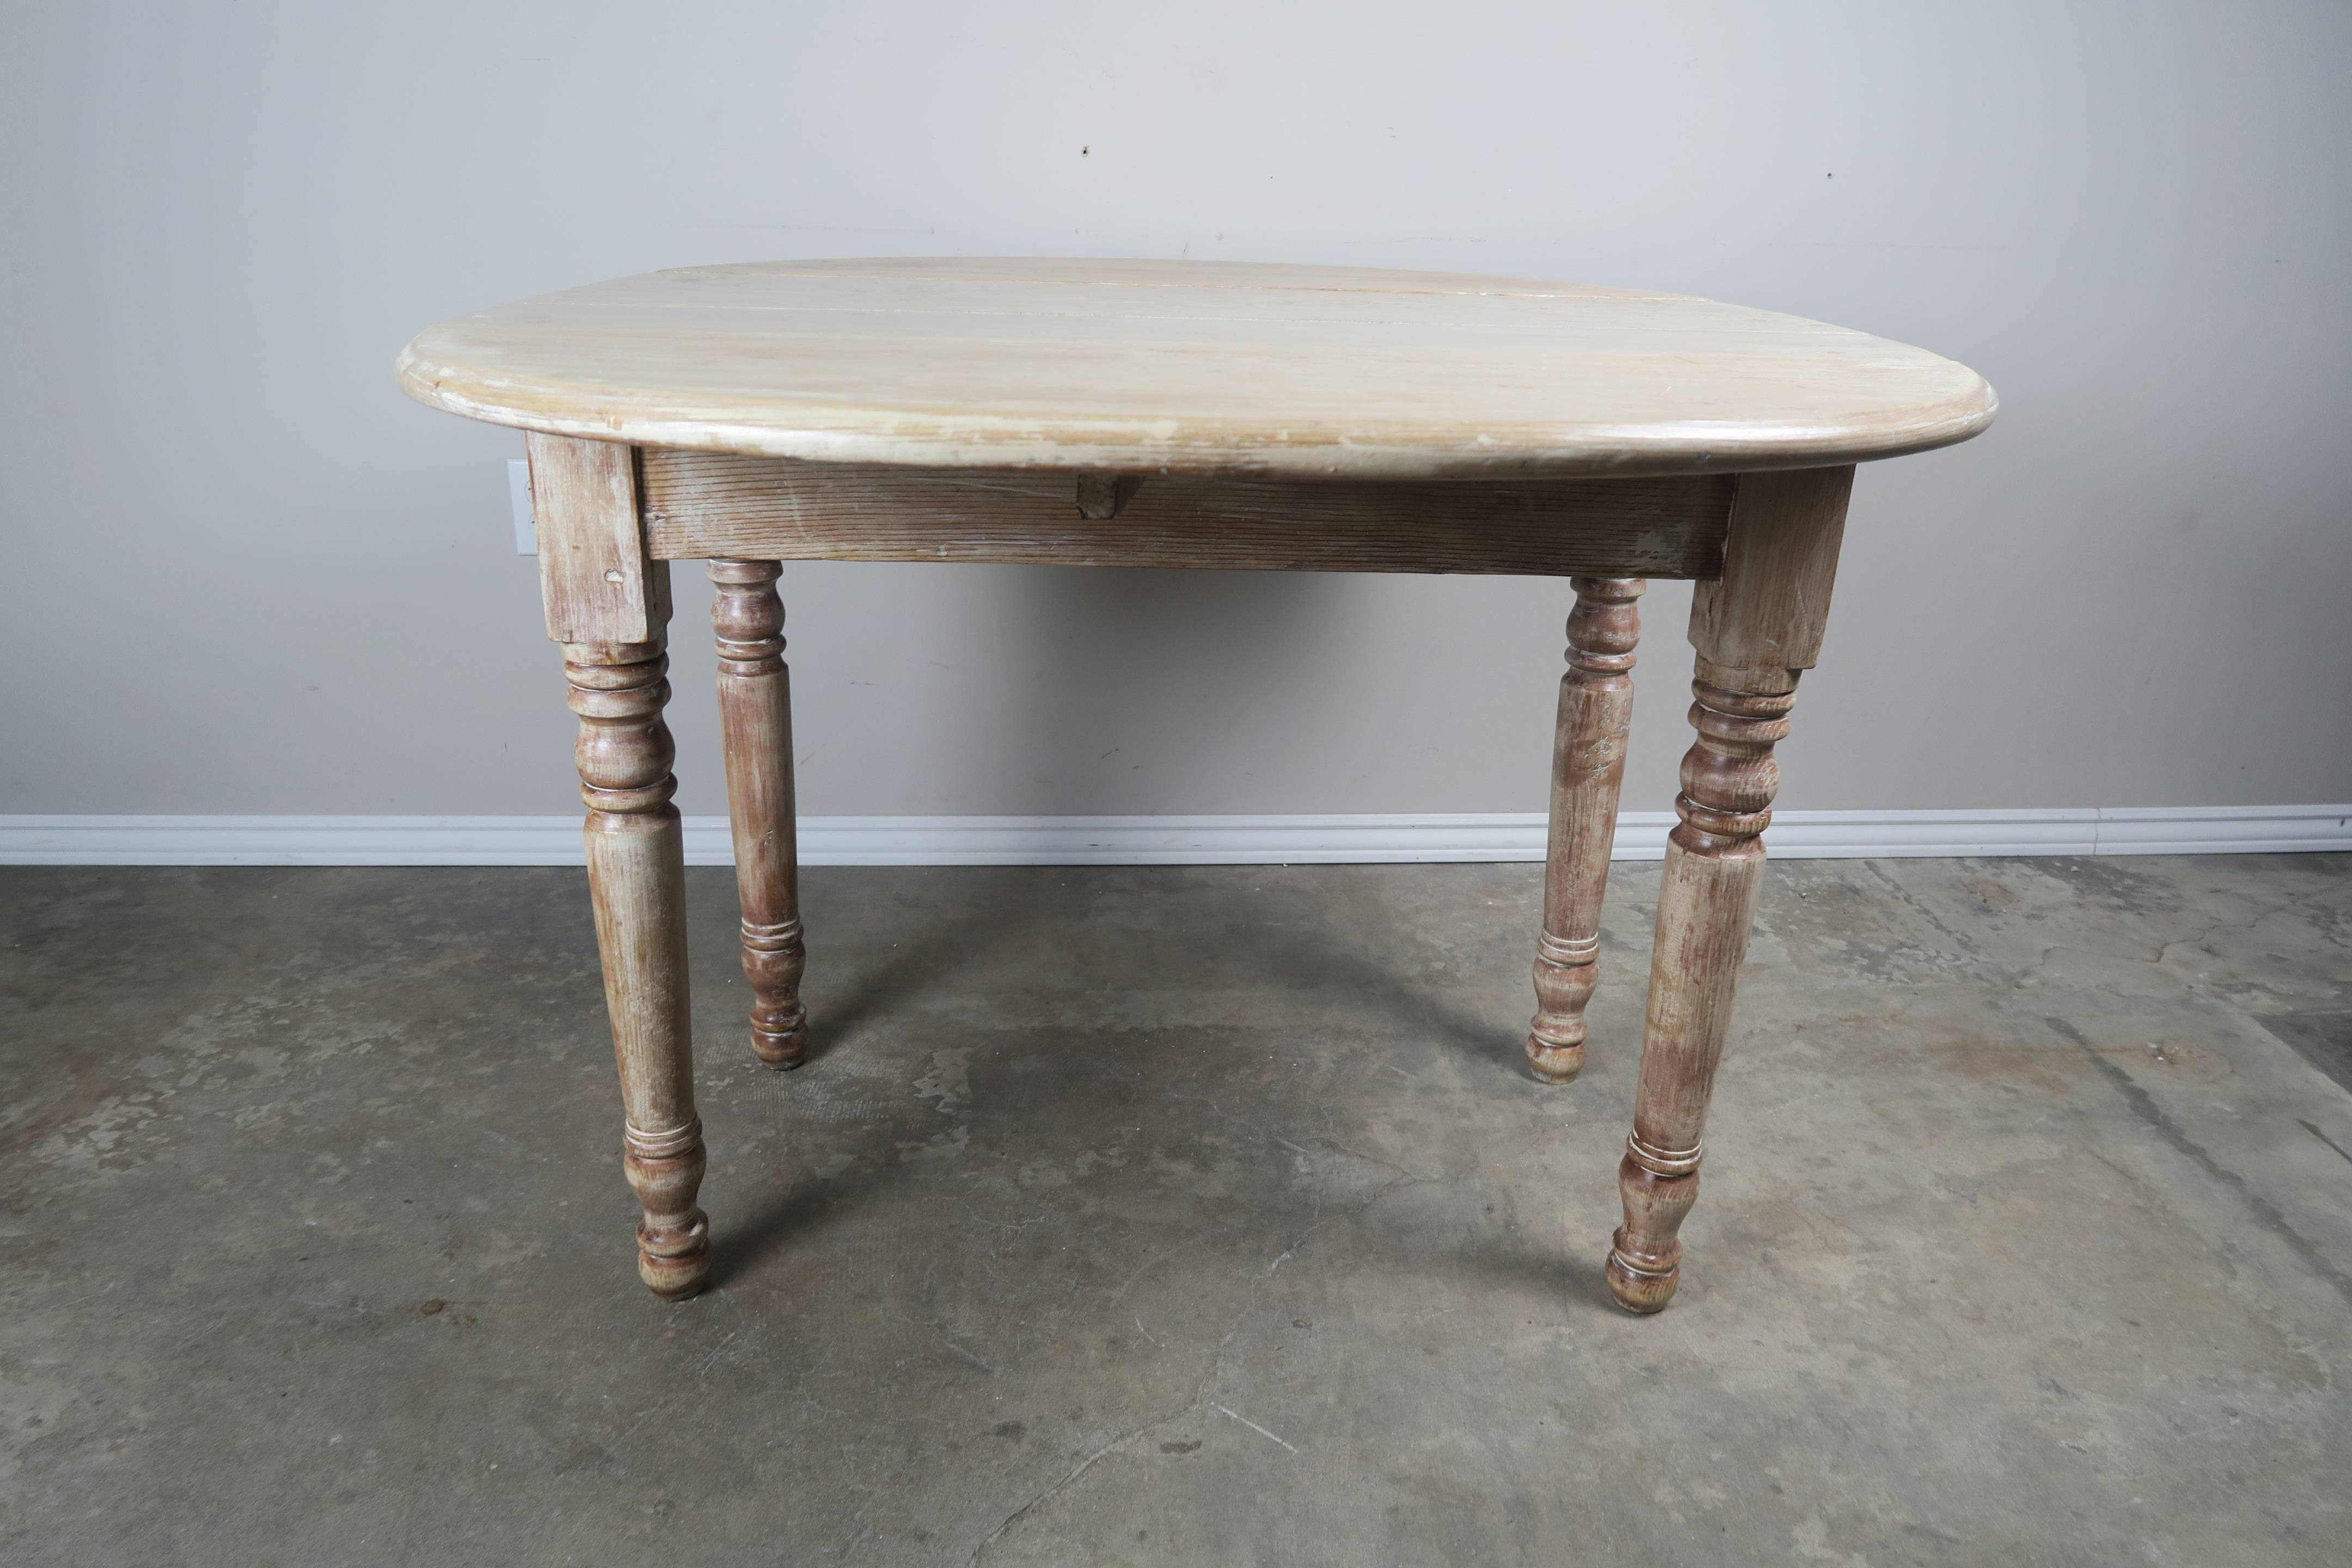 Pine English Drop-Leaf Table with Natural Washed Finish